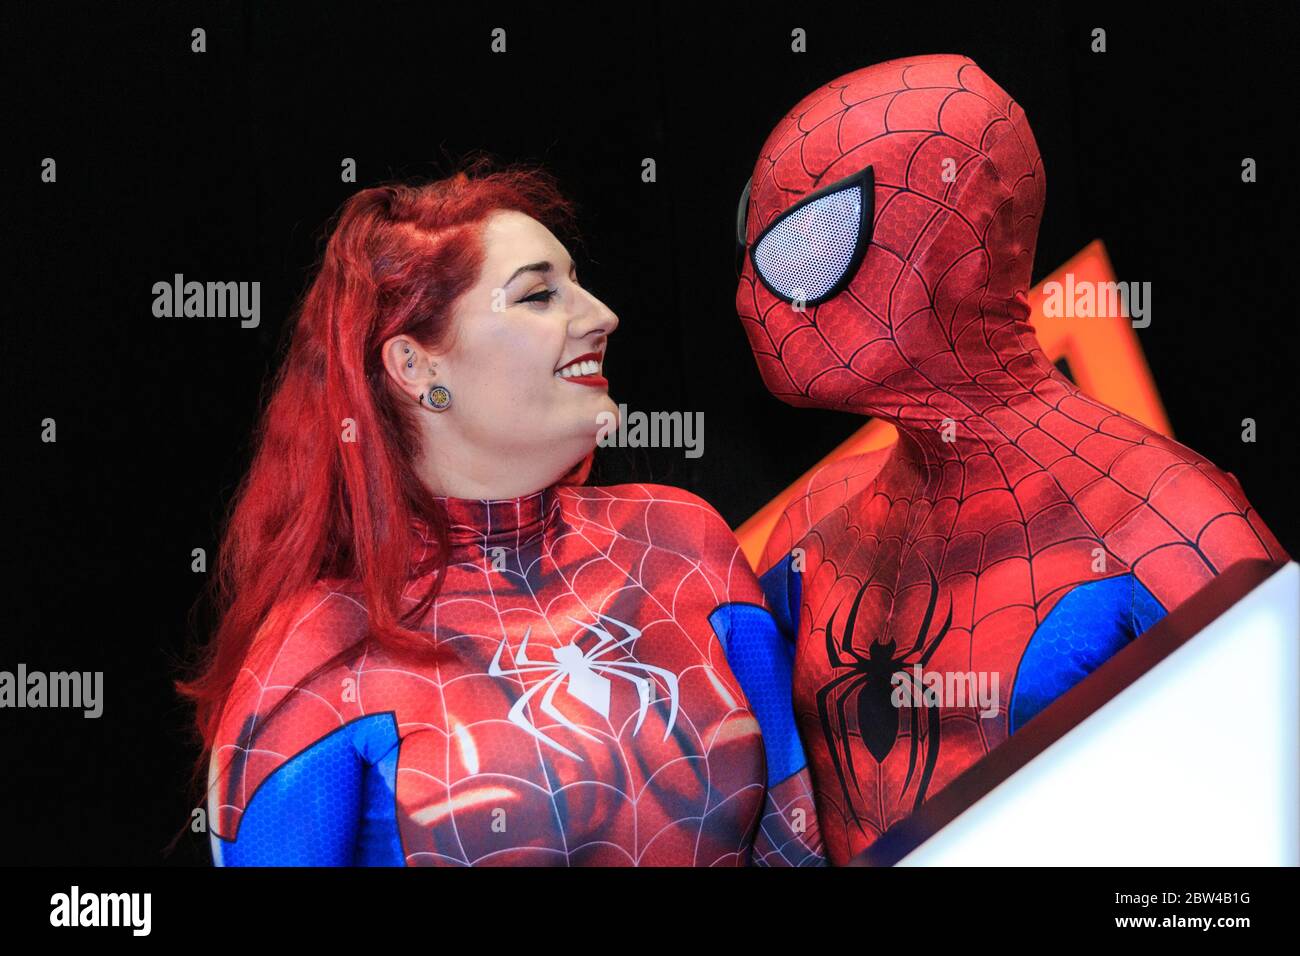 Spiderman and Spiderwoman pose togetherat MCM Comicon cosplayer convention, ExCel London, UK Stock Photo